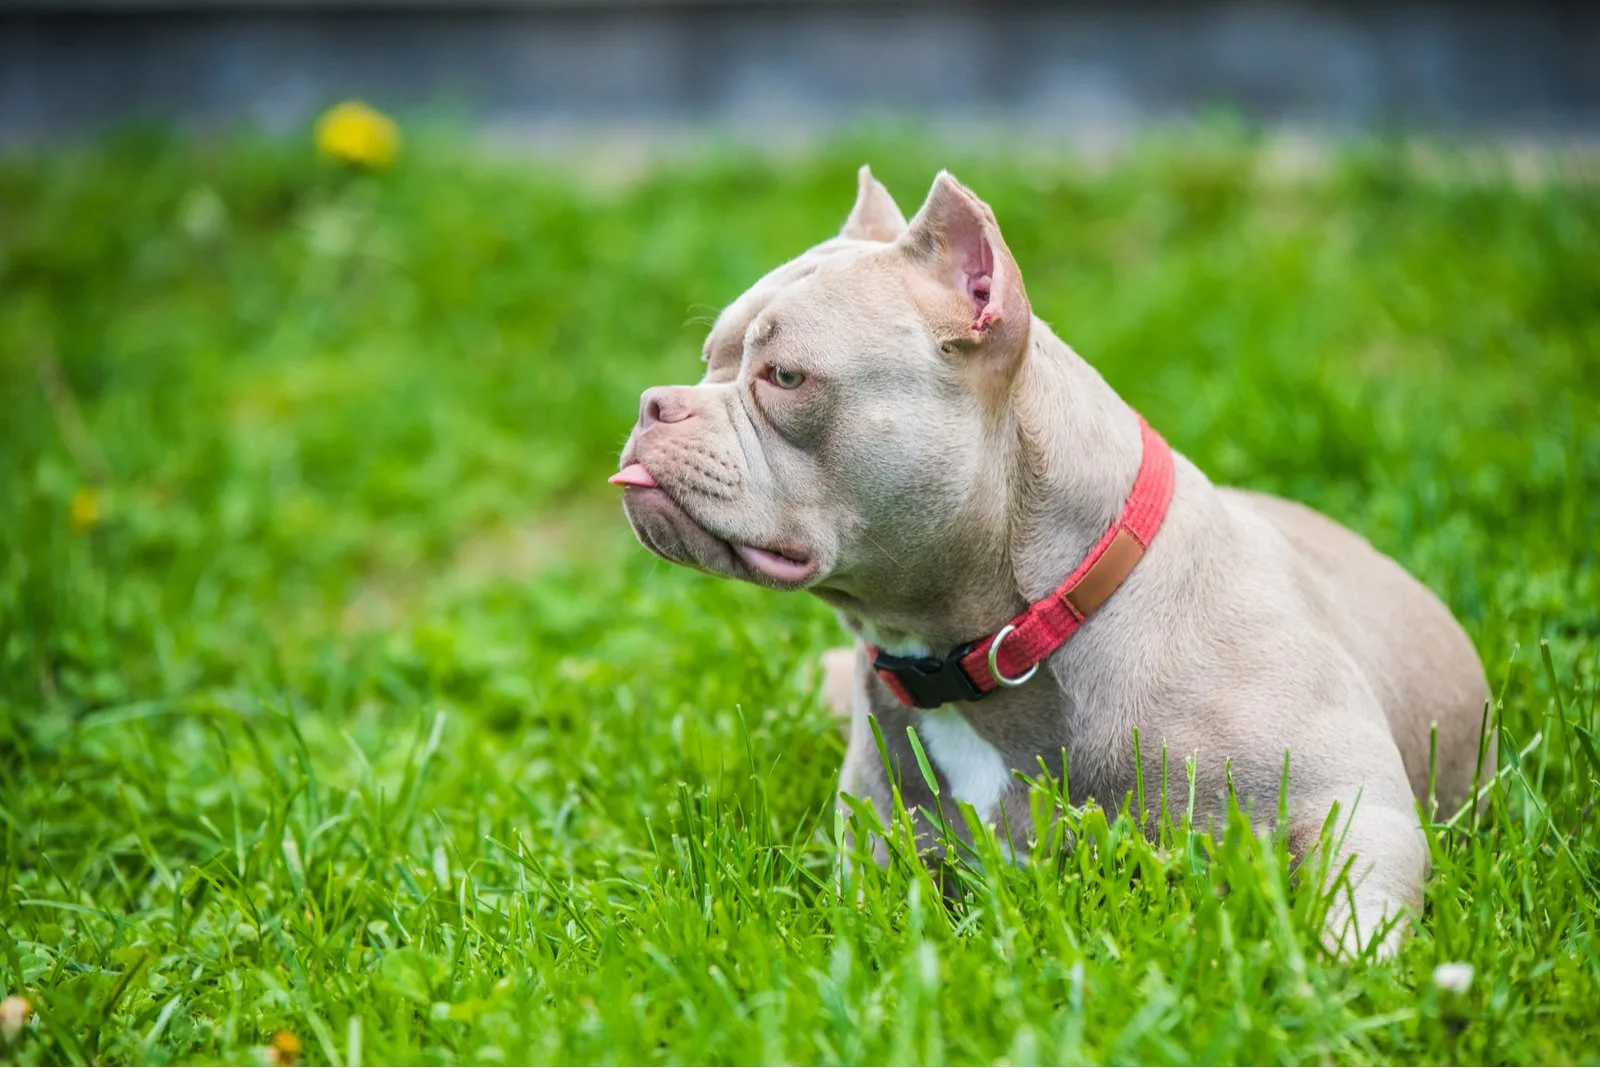 pocket sized pitbull standing in grass outdoor